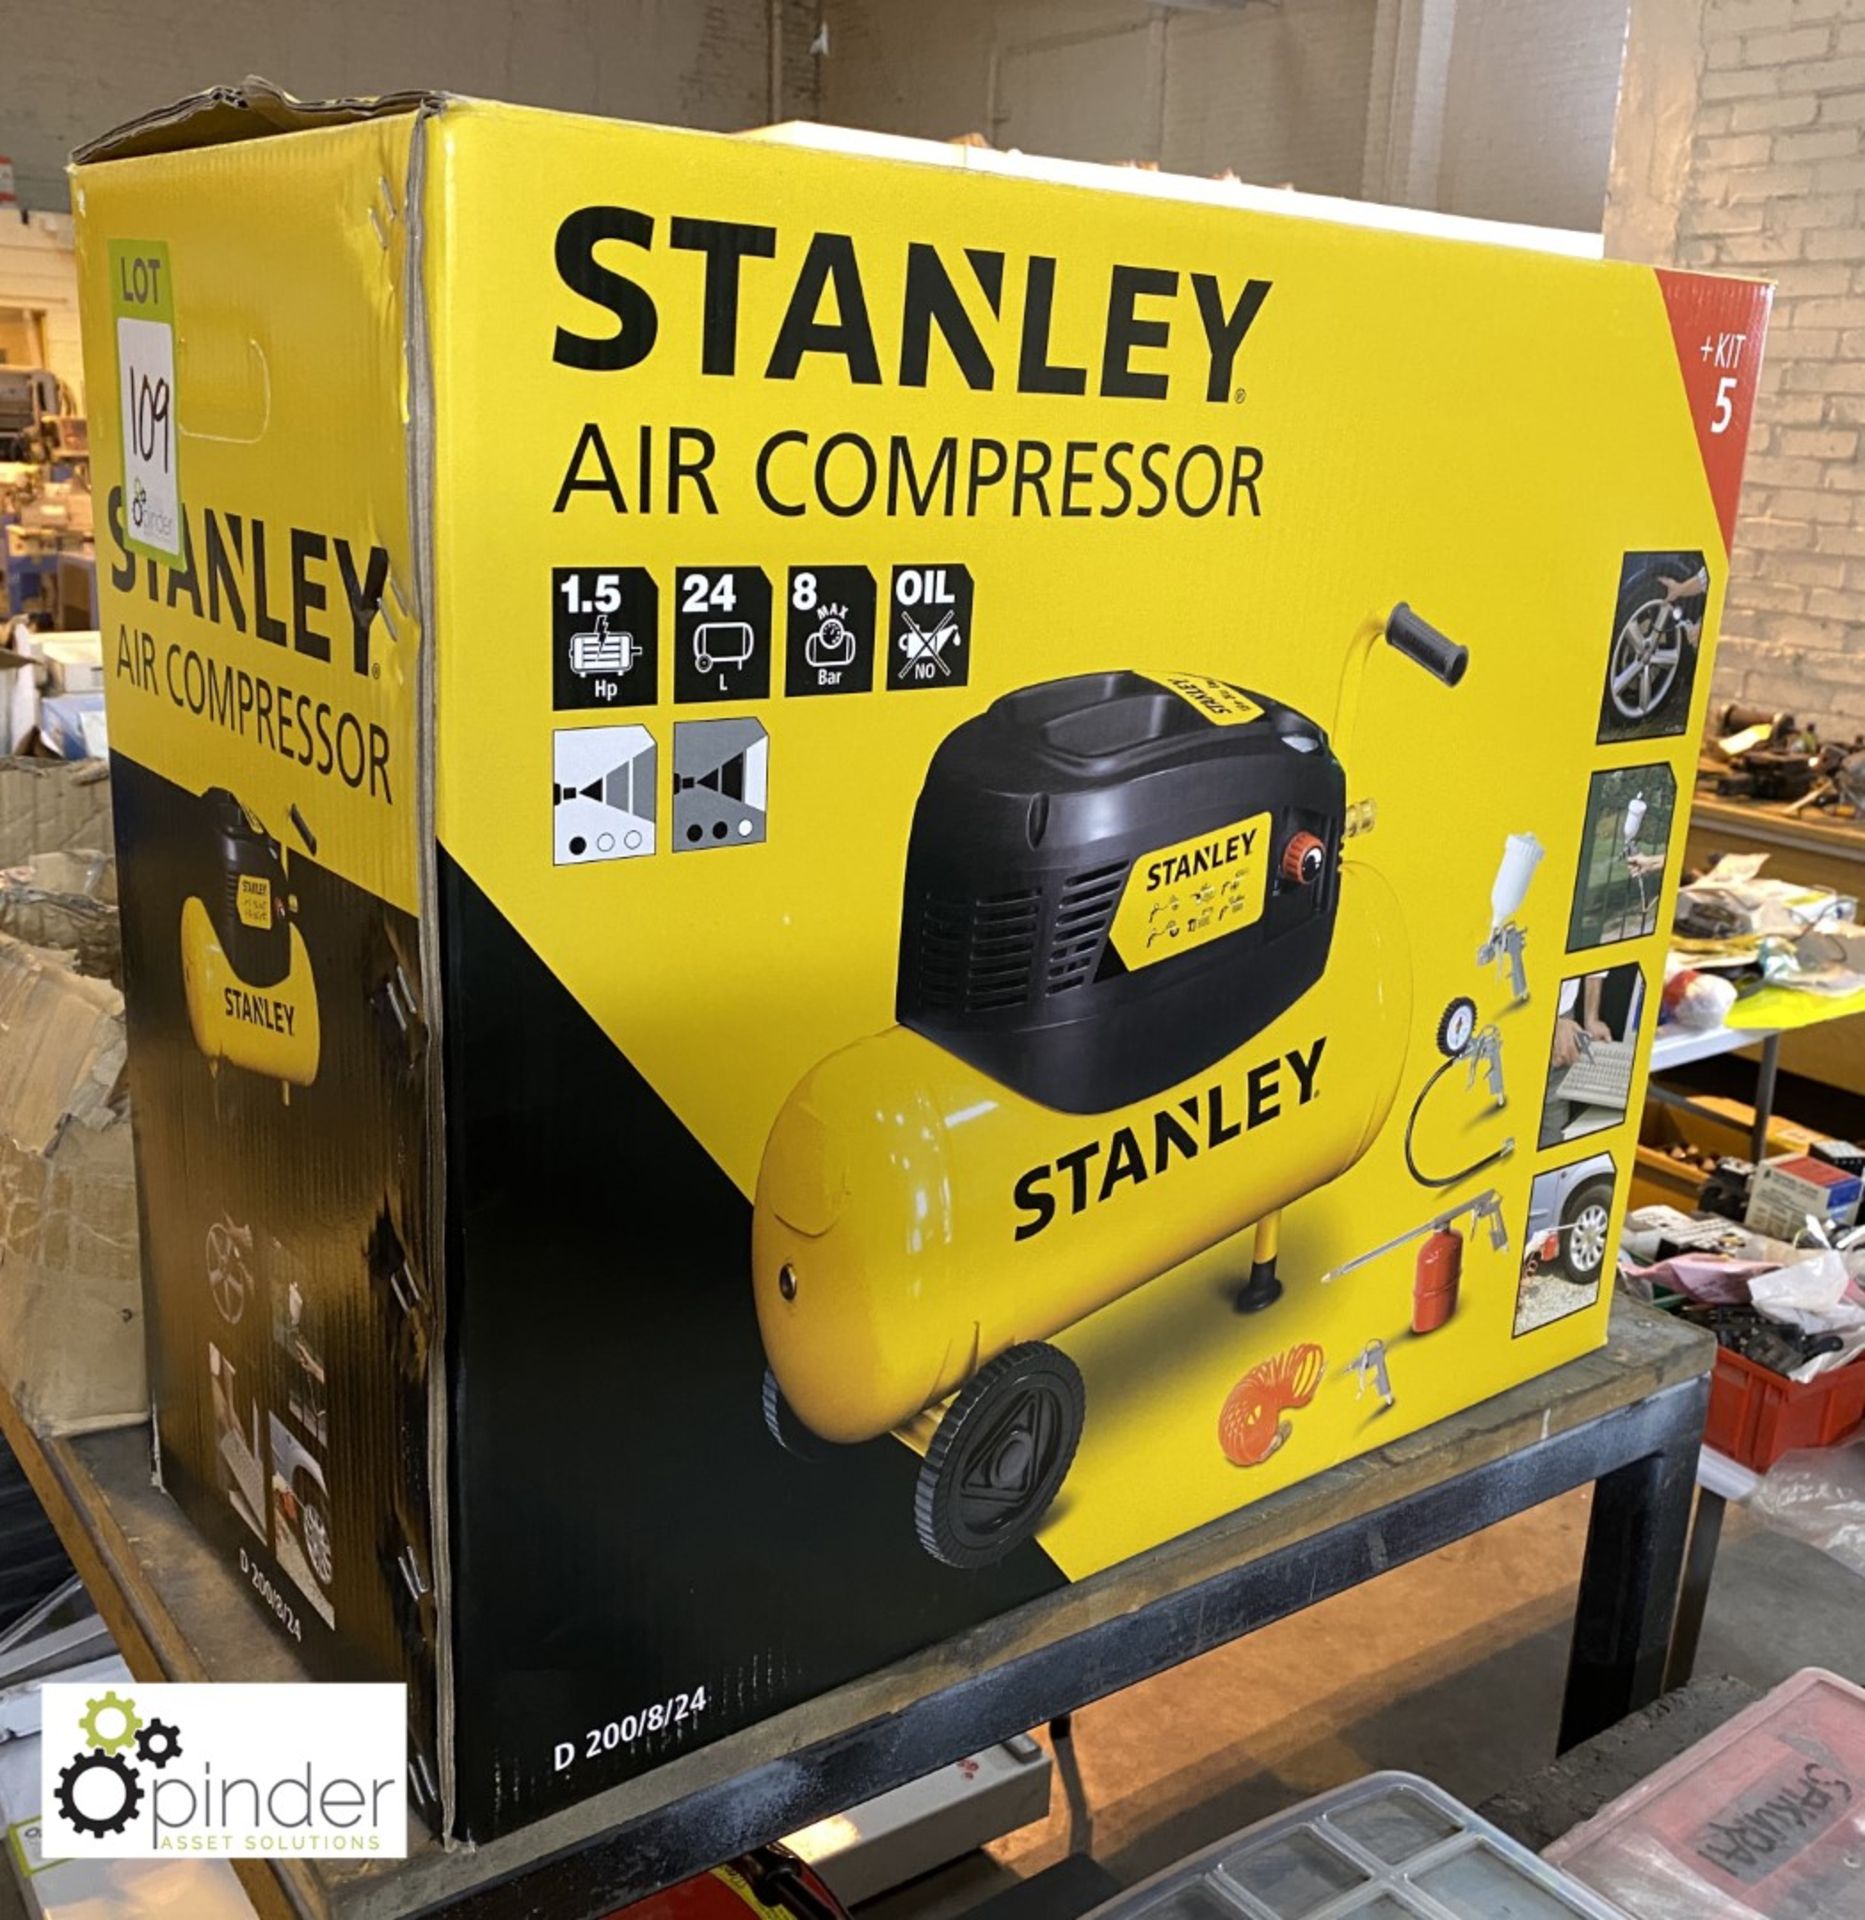 Stanley D200/8/24 portable Air Compressor, 8 bar max, boxed and unused